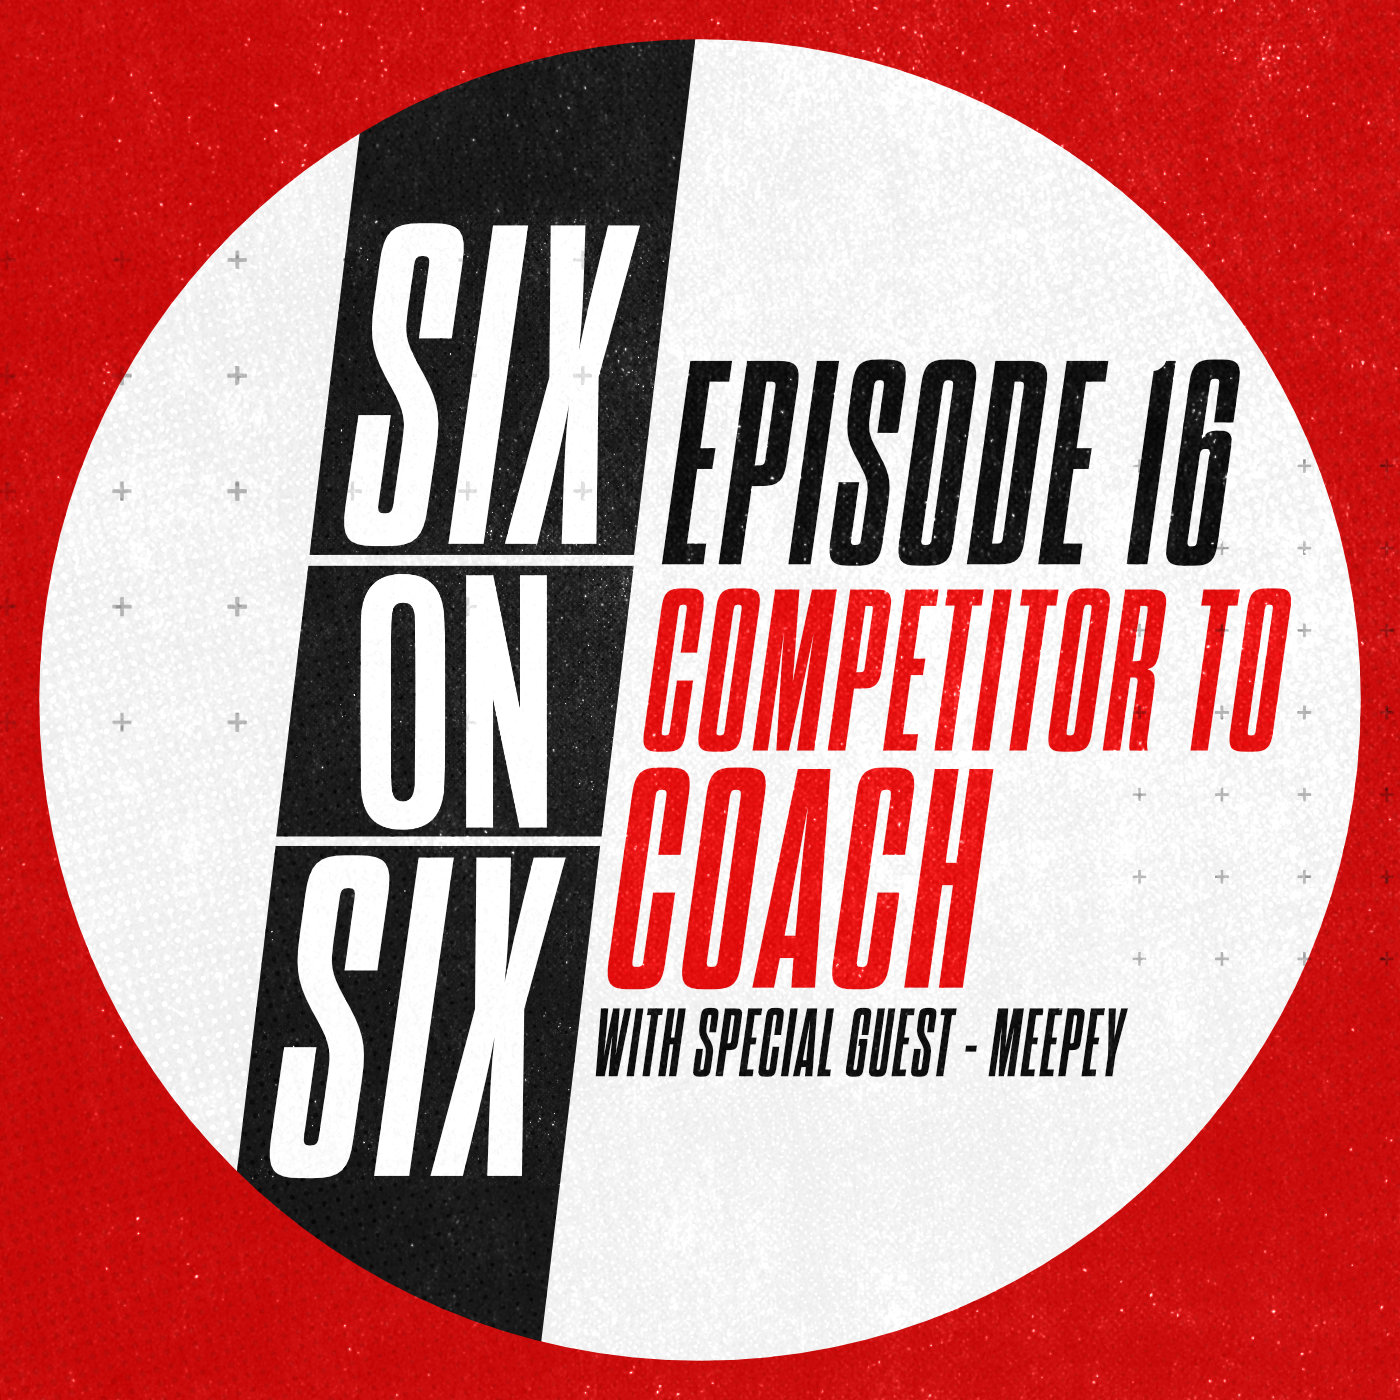 Episode 16 // Competitor to Coach (with special guest meepeY)